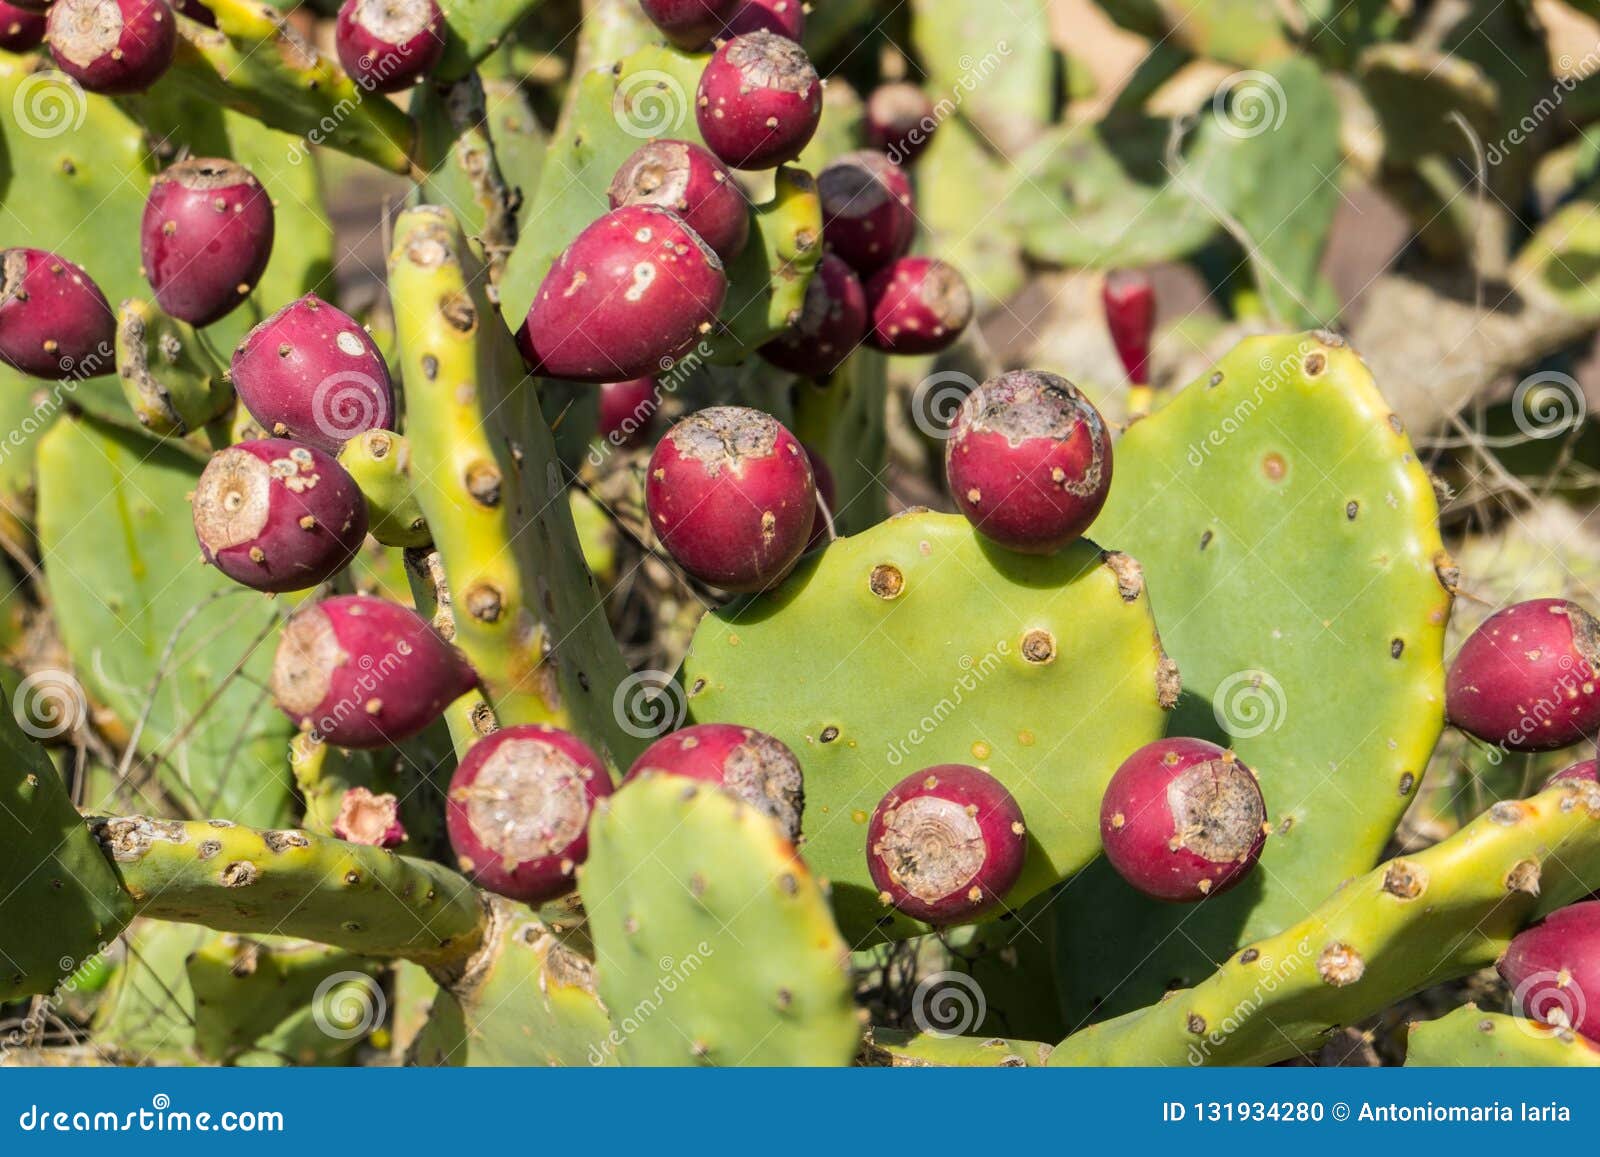 Prickly Pear Cactus With Fruits Stock Photo Image Of Botany Background 131934280